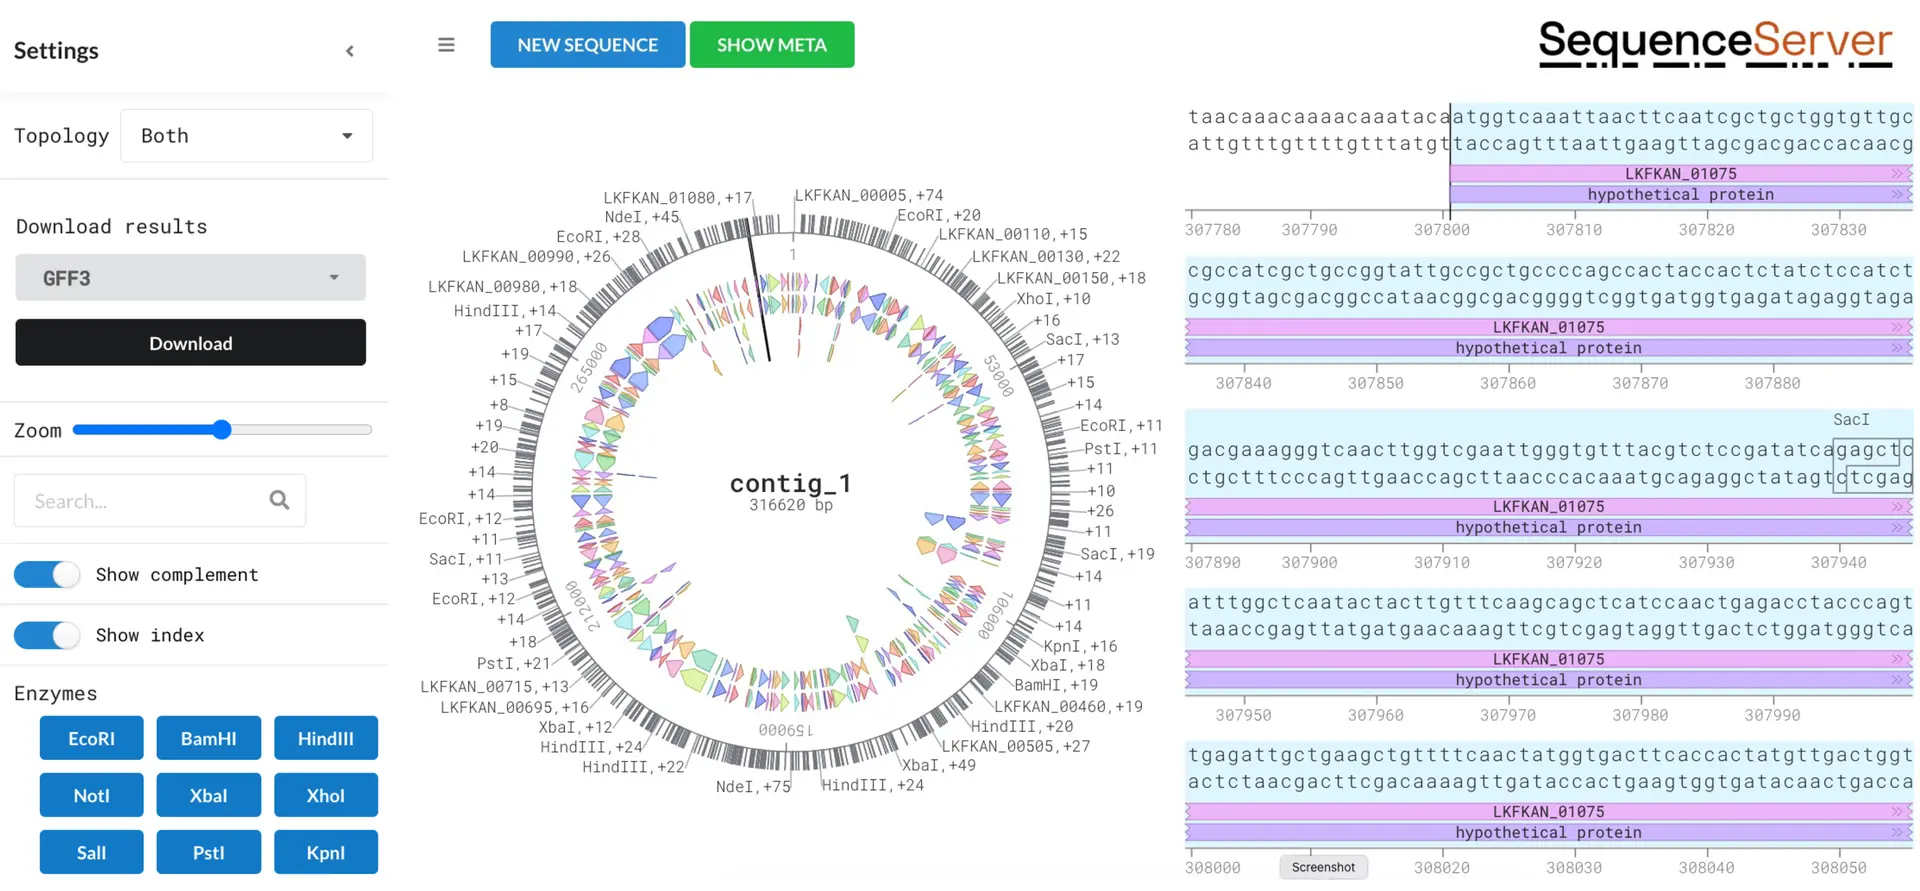 SequenceServer DNA Visualizer can identify yeast genome features and gives their location